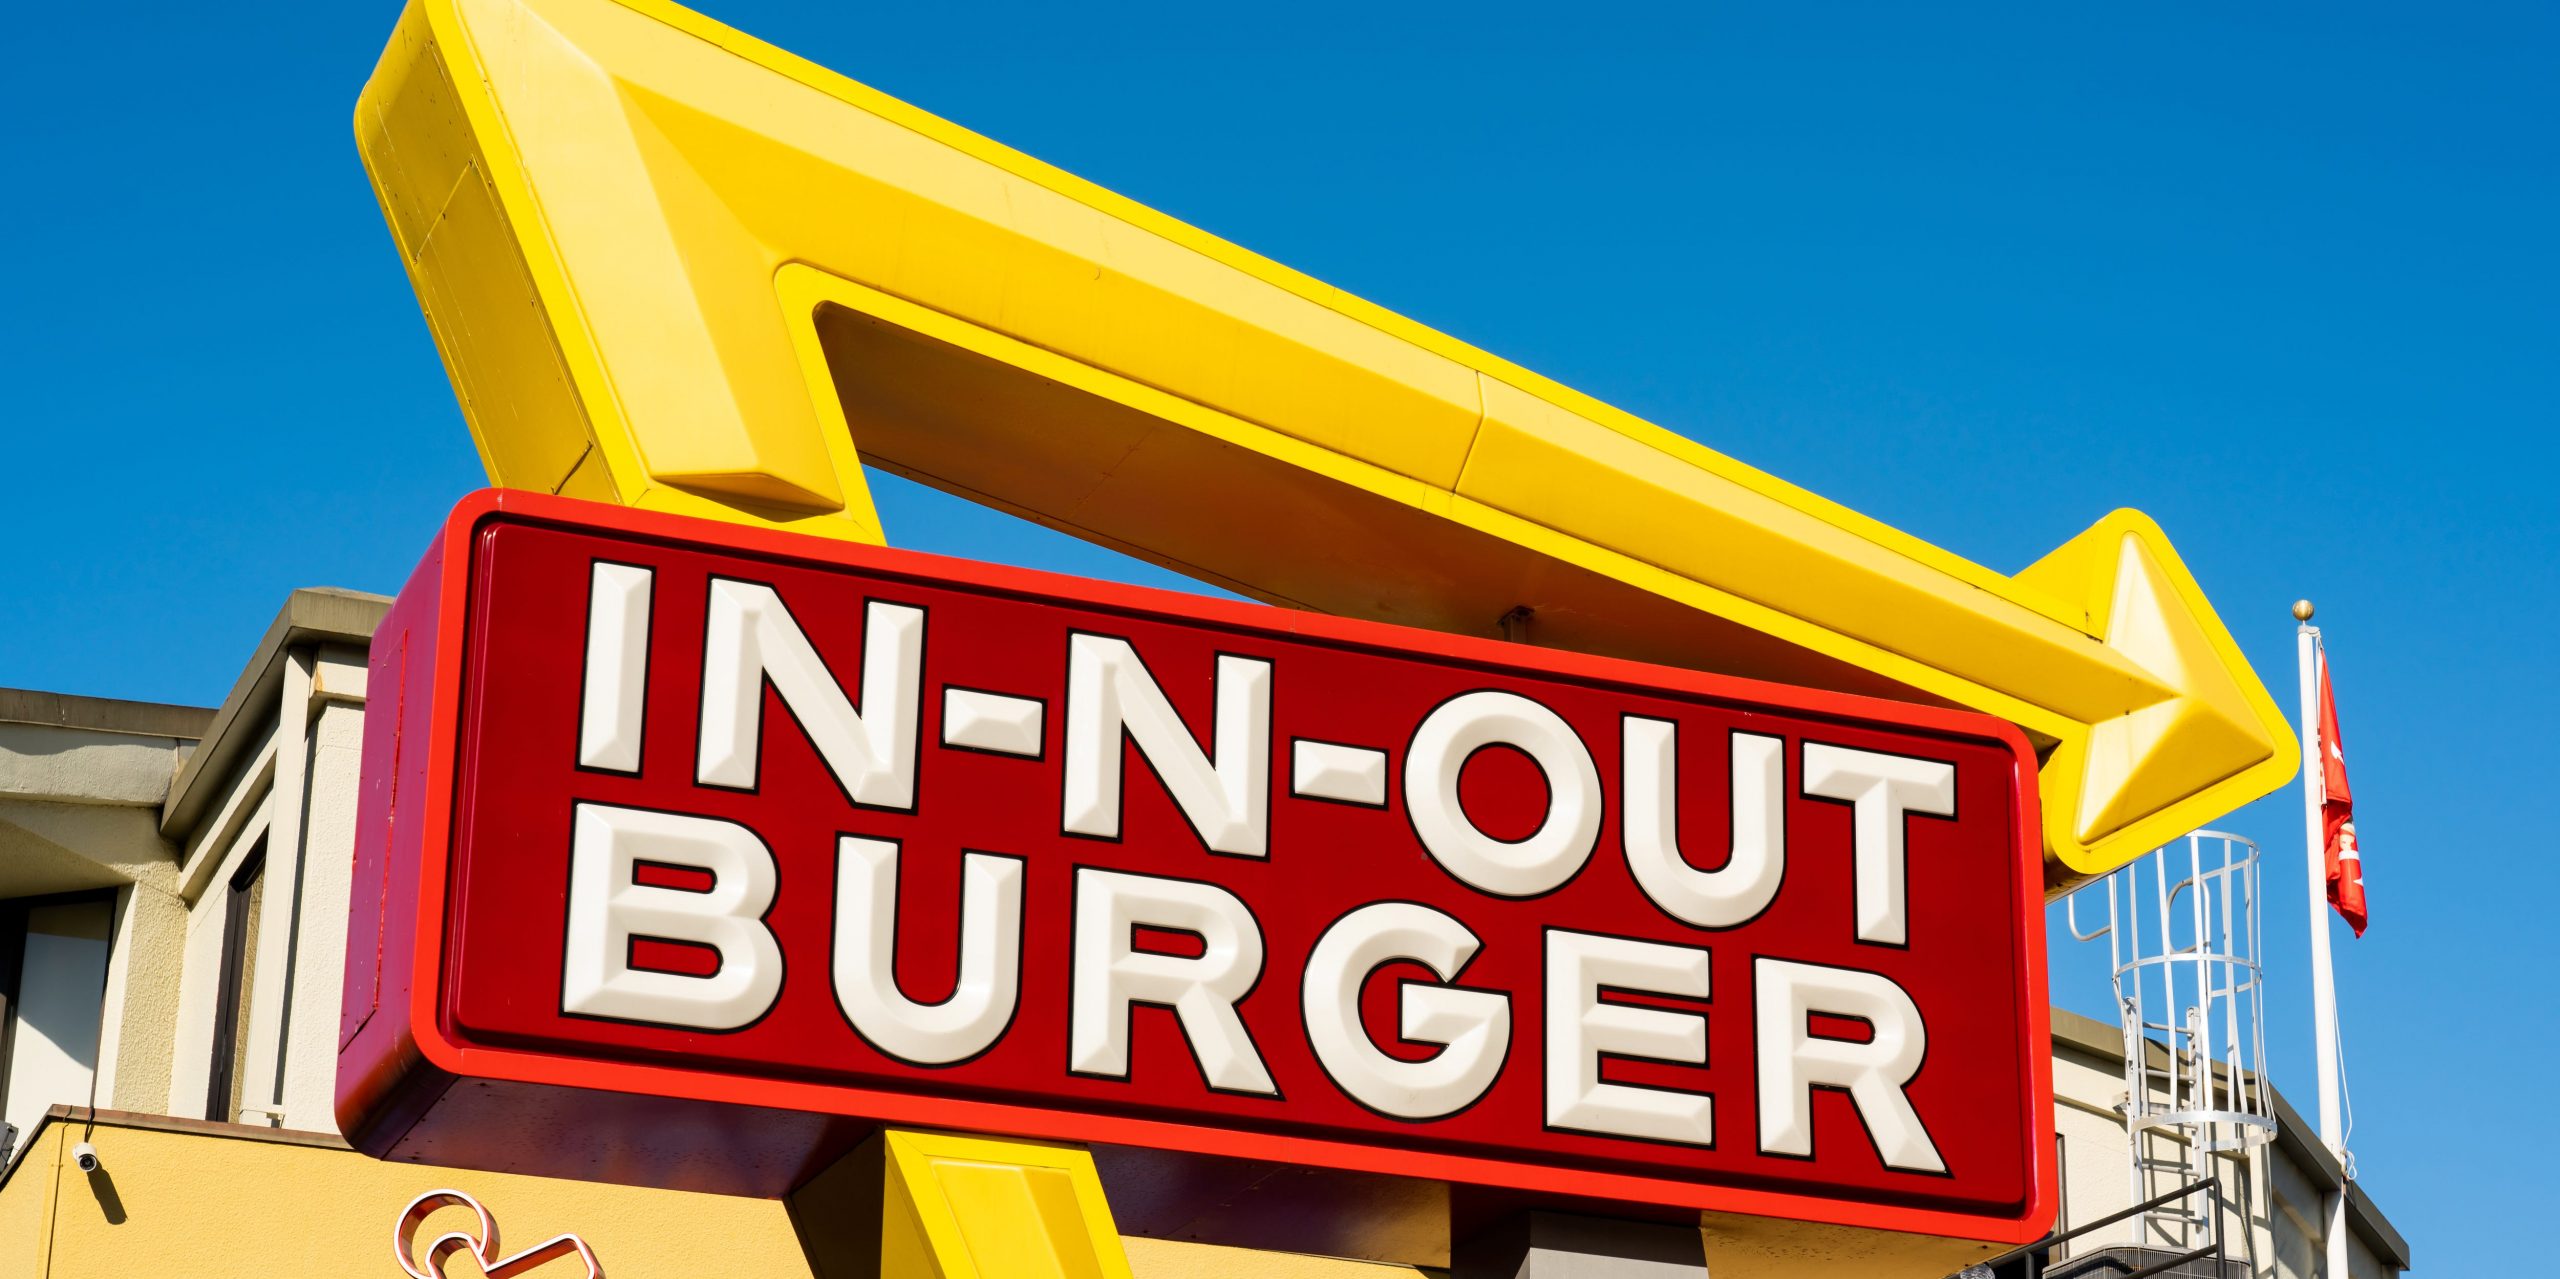 An In-N-Out Burger sign.